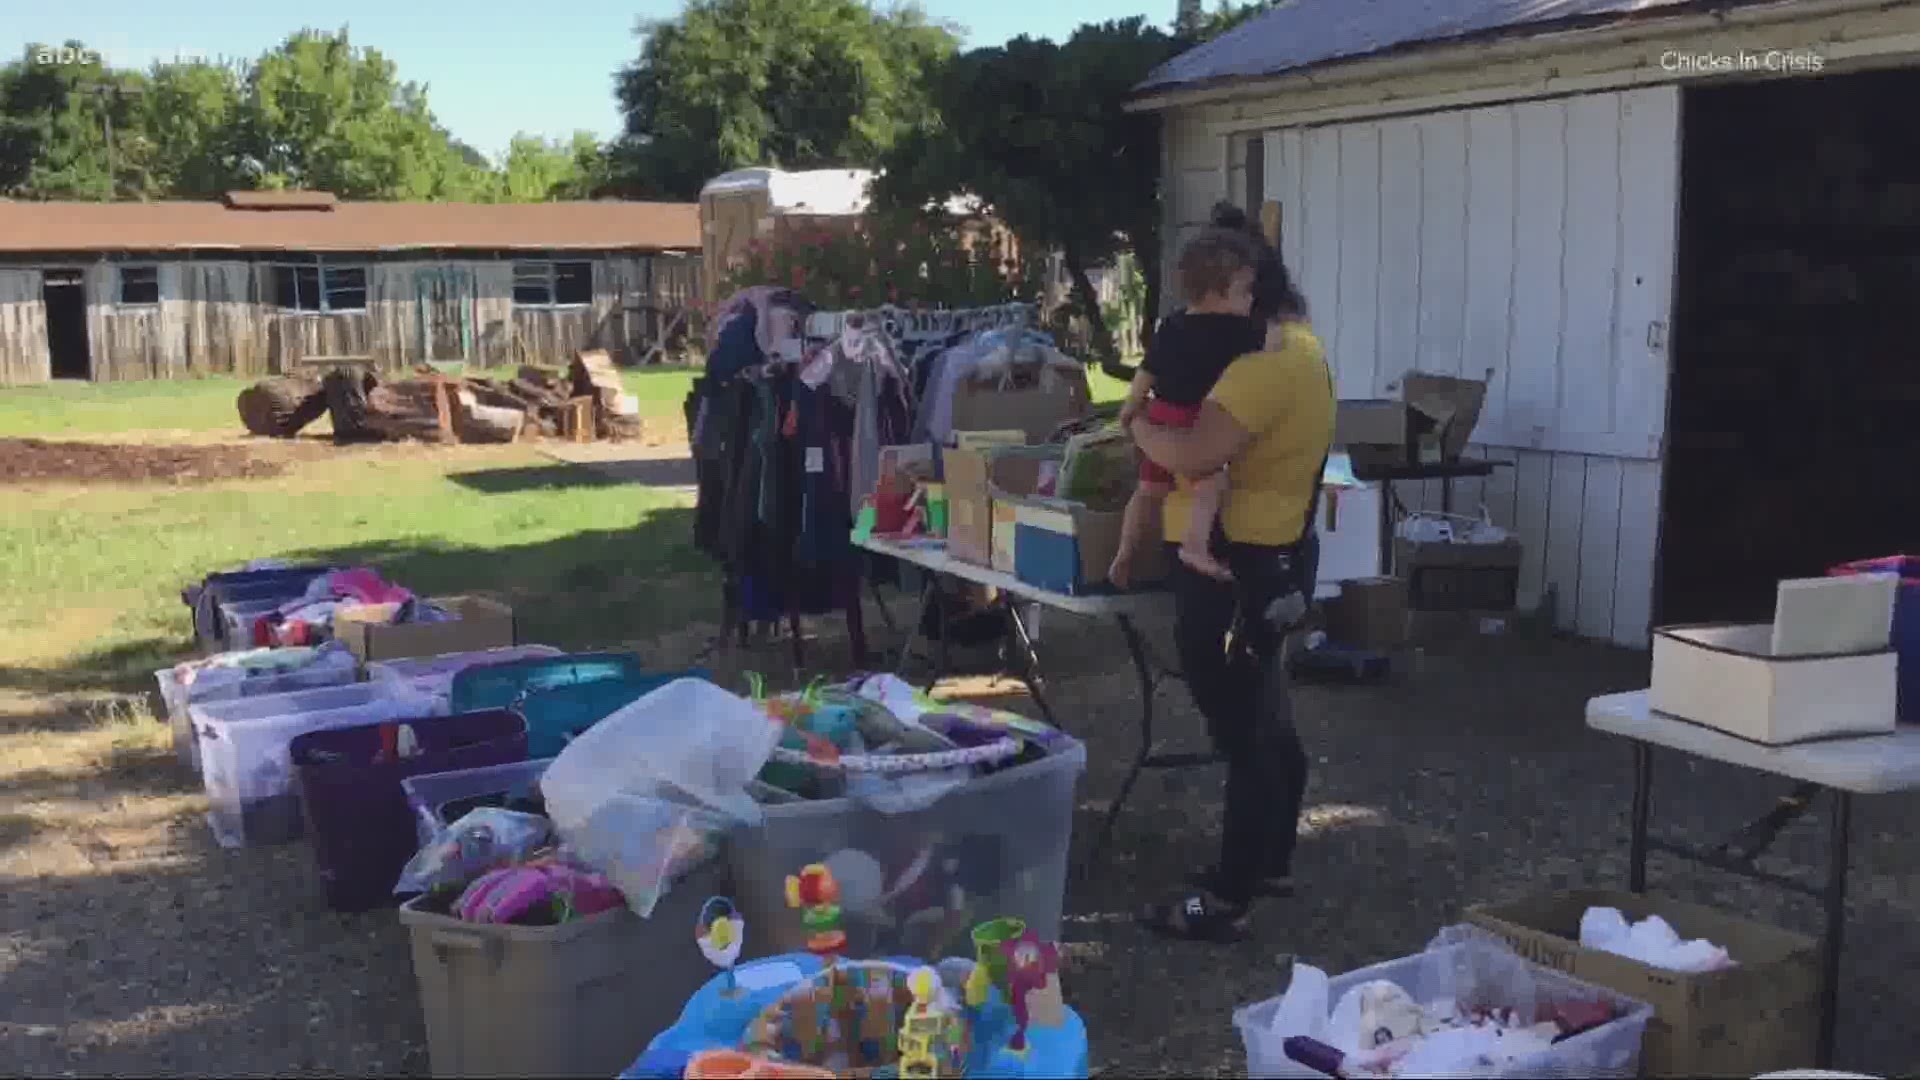 Young single moms get help from Elk Grove thanks to this Everyday Hero.